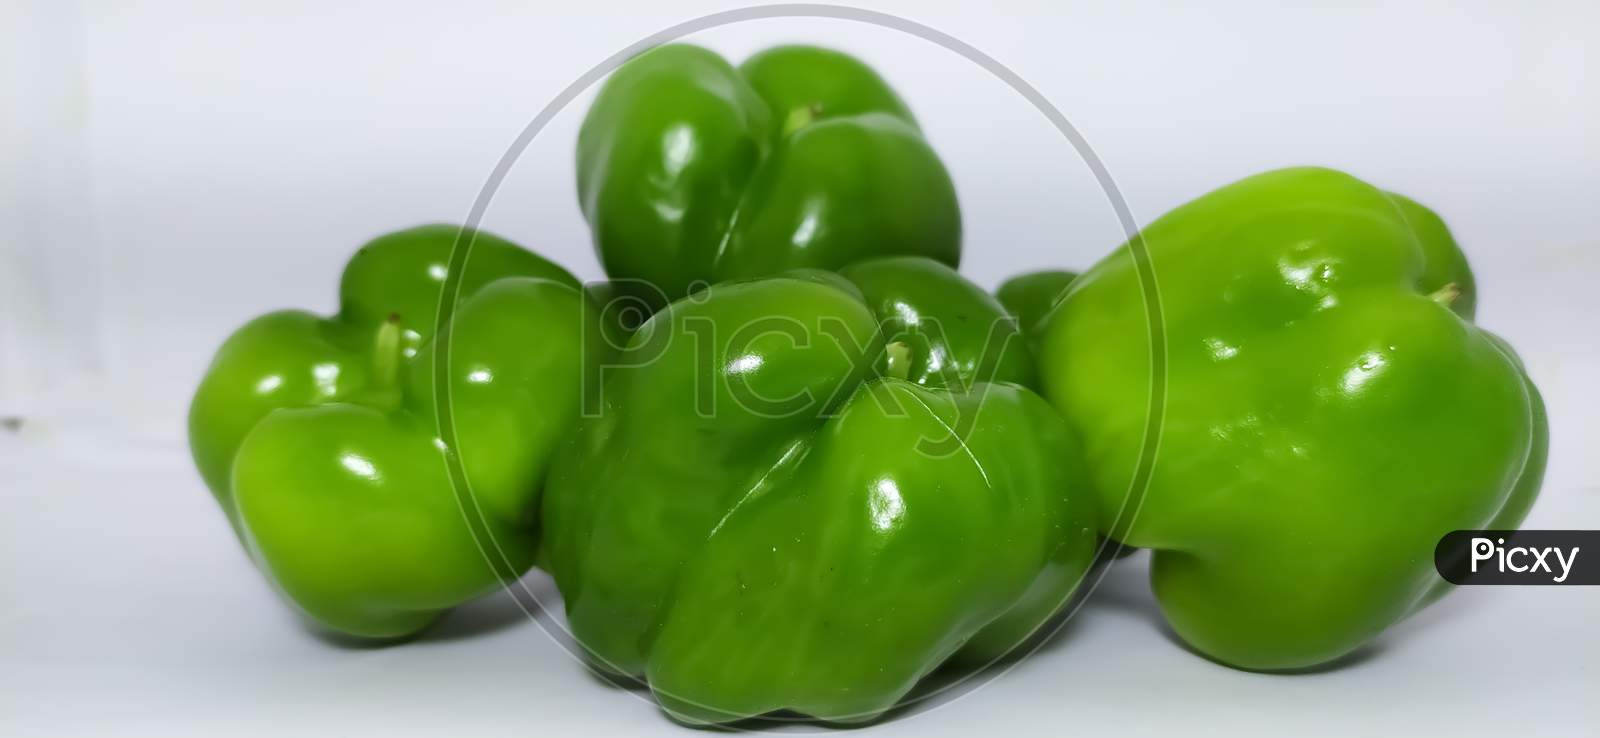 The bell pepper is the fruit of plants in the Grossum cultivar group of the species Capsicum annuum in indian village image